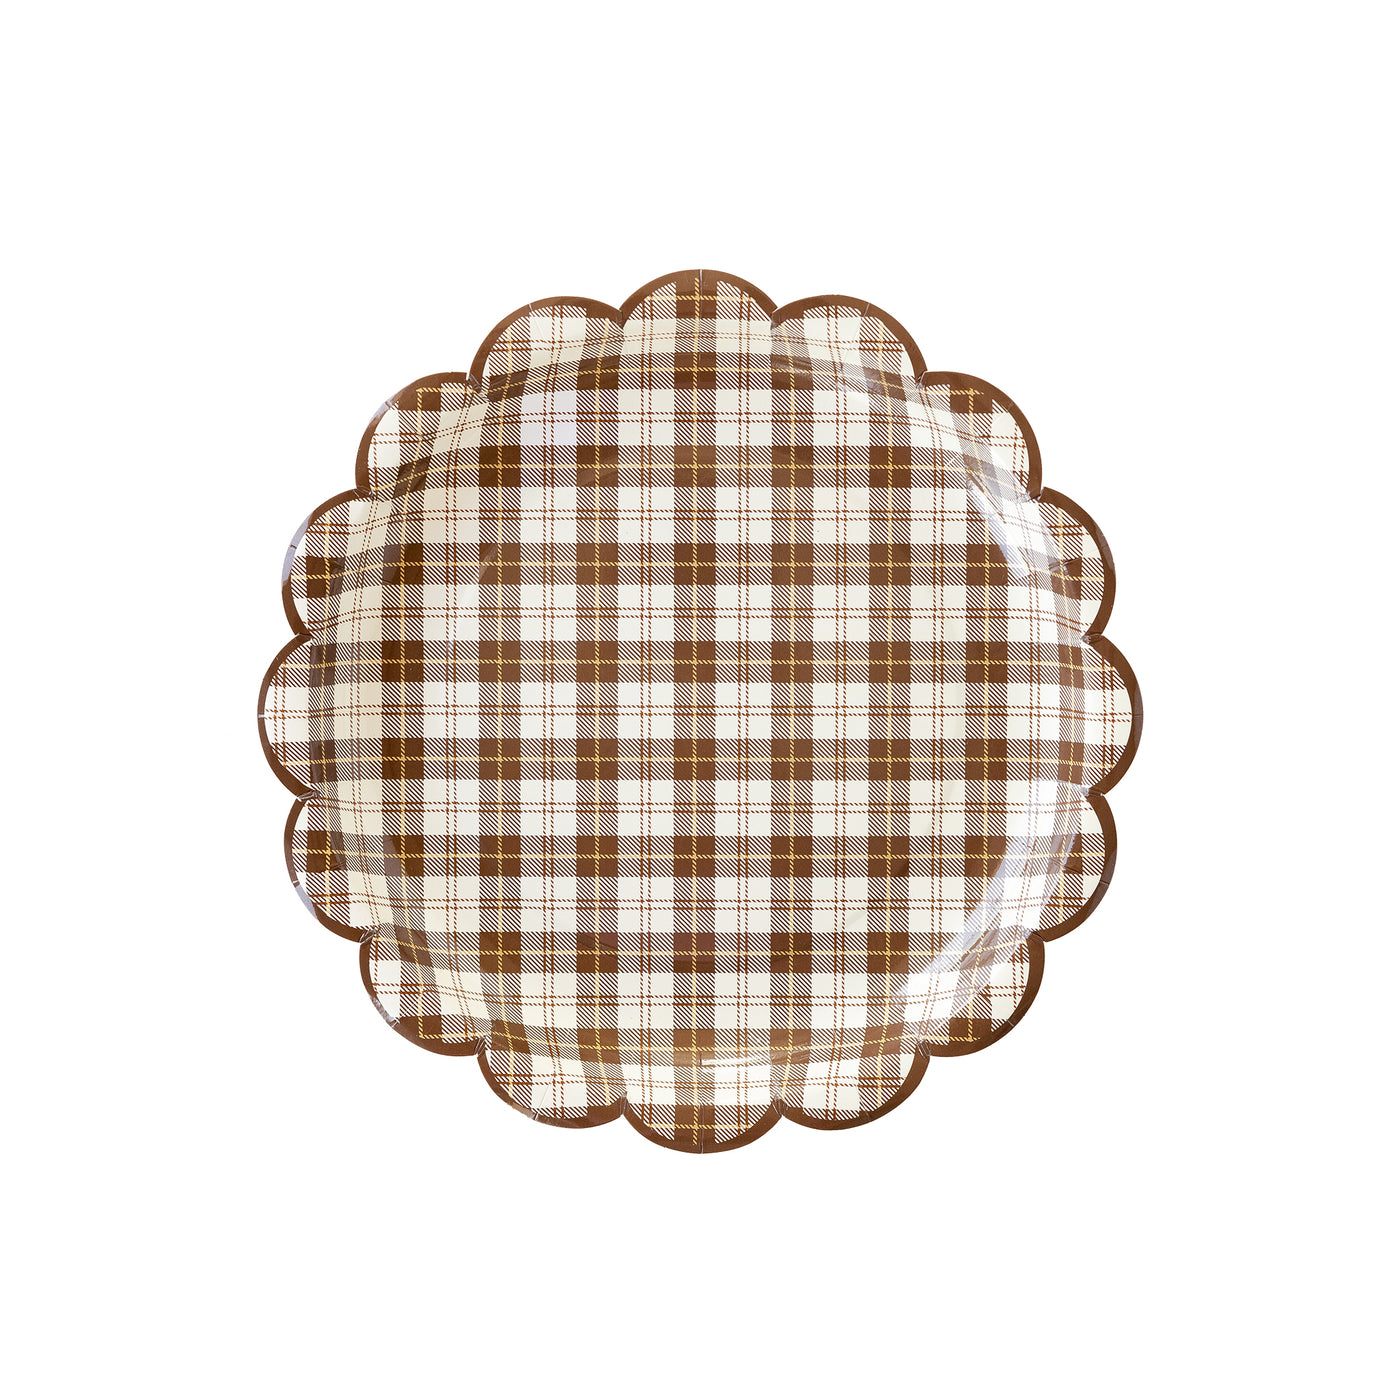 THP1044 - Harvest Scallop Brown Plaid Paper Plate